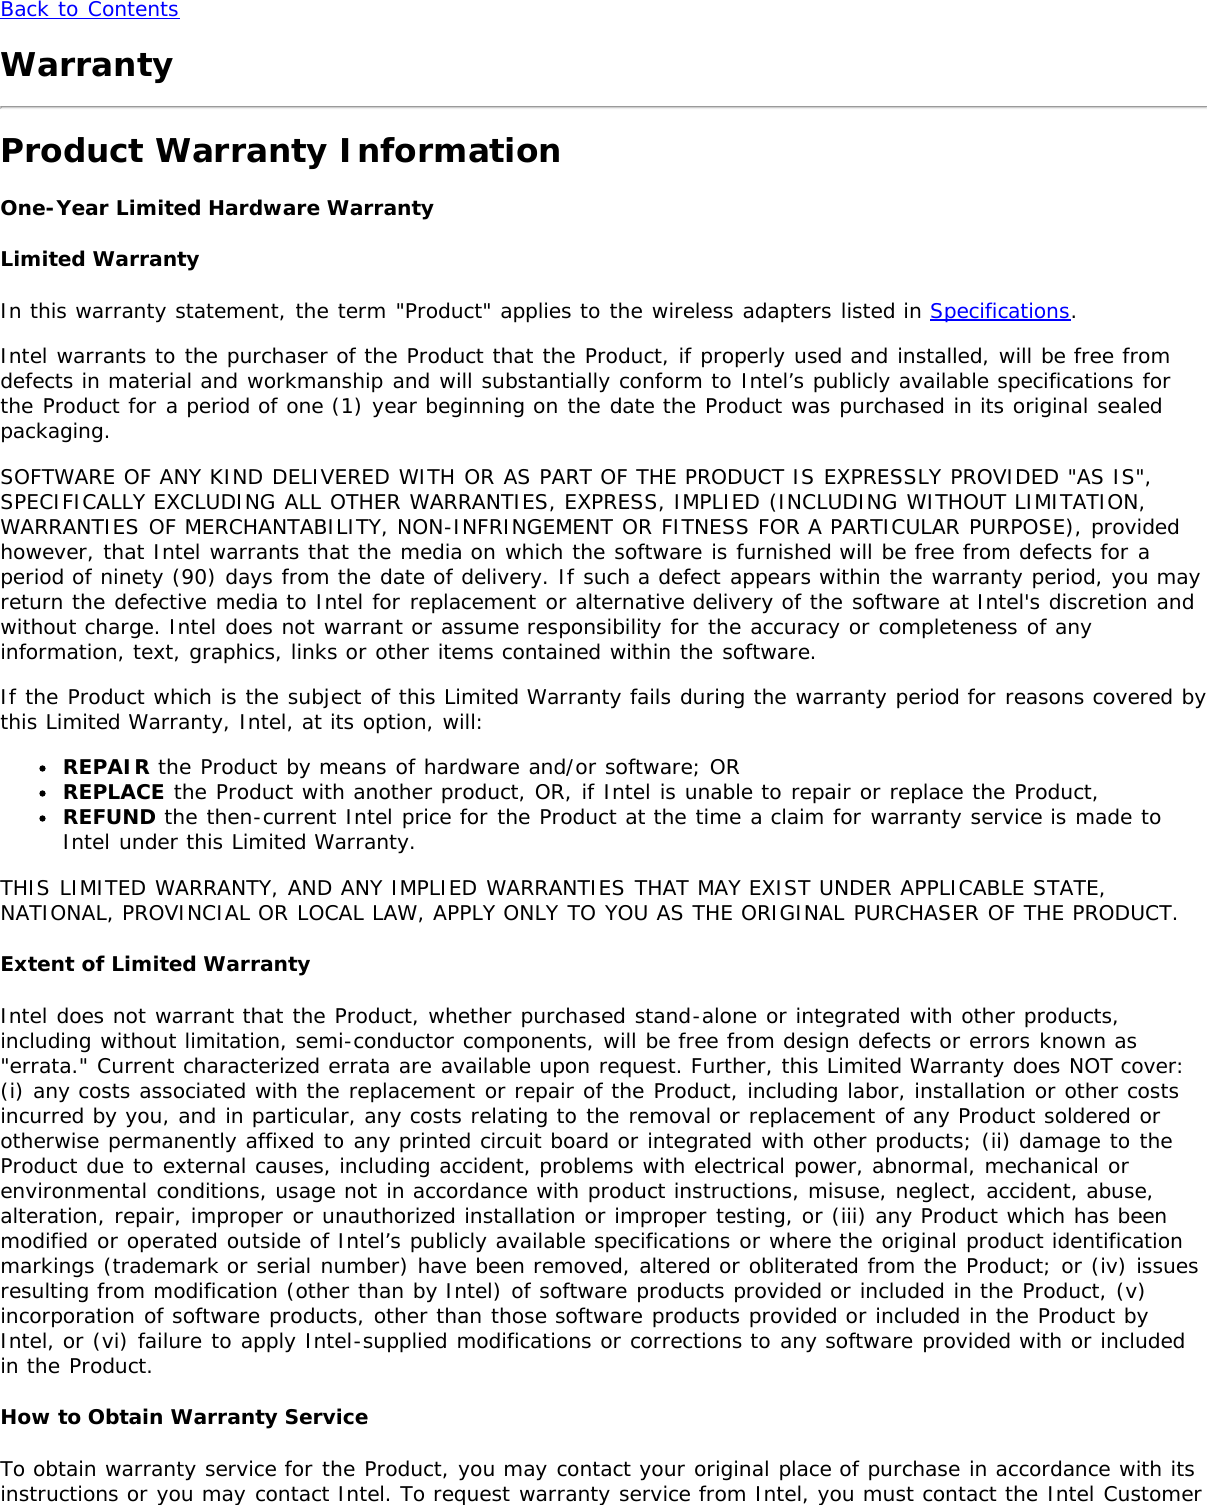 Back to ContentsWarrantyProduct Warranty InformationOne-Year Limited Hardware WarrantyLimited WarrantyIn this warranty statement, the term &quot;Product&quot; applies to the wireless adapters listed in Specifications.Intel warrants to the purchaser of the Product that the Product, if properly used and installed, will be free fromdefects in material and workmanship and will substantially conform to Intel’s publicly available specifications forthe Product for a period of one (1) year beginning on the date the Product was purchased in its original sealedpackaging.SOFTWARE OF ANY KIND DELIVERED WITH OR AS PART OF THE PRODUCT IS EXPRESSLY PROVIDED &quot;AS IS&quot;,SPECIFICALLY EXCLUDING ALL OTHER WARRANTIES, EXPRESS, IMPLIED (INCLUDING WITHOUT LIMITATION,WARRANTIES OF MERCHANTABILITY, NON-INFRINGEMENT OR FITNESS FOR A PARTICULAR PURPOSE), providedhowever, that Intel warrants that the media on which the software is furnished will be free from defects for aperiod of ninety (90) days from the date of delivery. If such a defect appears within the warranty period, you mayreturn the defective media to Intel for replacement or alternative delivery of the software at Intel&apos;s discretion andwithout charge. Intel does not warrant or assume responsibility for the accuracy or completeness of anyinformation, text, graphics, links or other items contained within the software.If the Product which is the subject of this Limited Warranty fails during the warranty period for reasons covered bythis Limited Warranty, Intel, at its option, will:REPAIR the Product by means of hardware and/or software; ORREPLACE the Product with another product, OR, if Intel is unable to repair or replace the Product,REFUND the then-current Intel price for the Product at the time a claim for warranty service is made toIntel under this Limited Warranty.THIS LIMITED WARRANTY, AND ANY IMPLIED WARRANTIES THAT MAY EXIST UNDER APPLICABLE STATE,NATIONAL, PROVINCIAL OR LOCAL LAW, APPLY ONLY TO YOU AS THE ORIGINAL PURCHASER OF THE PRODUCT.Extent of Limited WarrantyIntel does not warrant that the Product, whether purchased stand-alone or integrated with other products,including without limitation, semi-conductor components, will be free from design defects or errors known as&quot;errata.&quot; Current characterized errata are available upon request. Further, this Limited Warranty does NOT cover:(i) any costs associated with the replacement or repair of the Product, including labor, installation or other costsincurred by you, and in particular, any costs relating to the removal or replacement of any Product soldered orotherwise permanently affixed to any printed circuit board or integrated with other products; (ii) damage to theProduct due to external causes, including accident, problems with electrical power, abnormal, mechanical orenvironmental conditions, usage not in accordance with product instructions, misuse, neglect, accident, abuse,alteration, repair, improper or unauthorized installation or improper testing, or (iii) any Product which has beenmodified or operated outside of Intel’s publicly available specifications or where the original product identificationmarkings (trademark or serial number) have been removed, altered or obliterated from the Product; or (iv) issuesresulting from modification (other than by Intel) of software products provided or included in the Product, (v)incorporation of software products, other than those software products provided or included in the Product byIntel, or (vi) failure to apply Intel-supplied modifications or corrections to any software provided with or includedin the Product.How to Obtain Warranty ServiceTo obtain warranty service for the Product, you may contact your original place of purchase in accordance with itsinstructions or you may contact Intel. To request warranty service from Intel, you must contact the Intel Customer